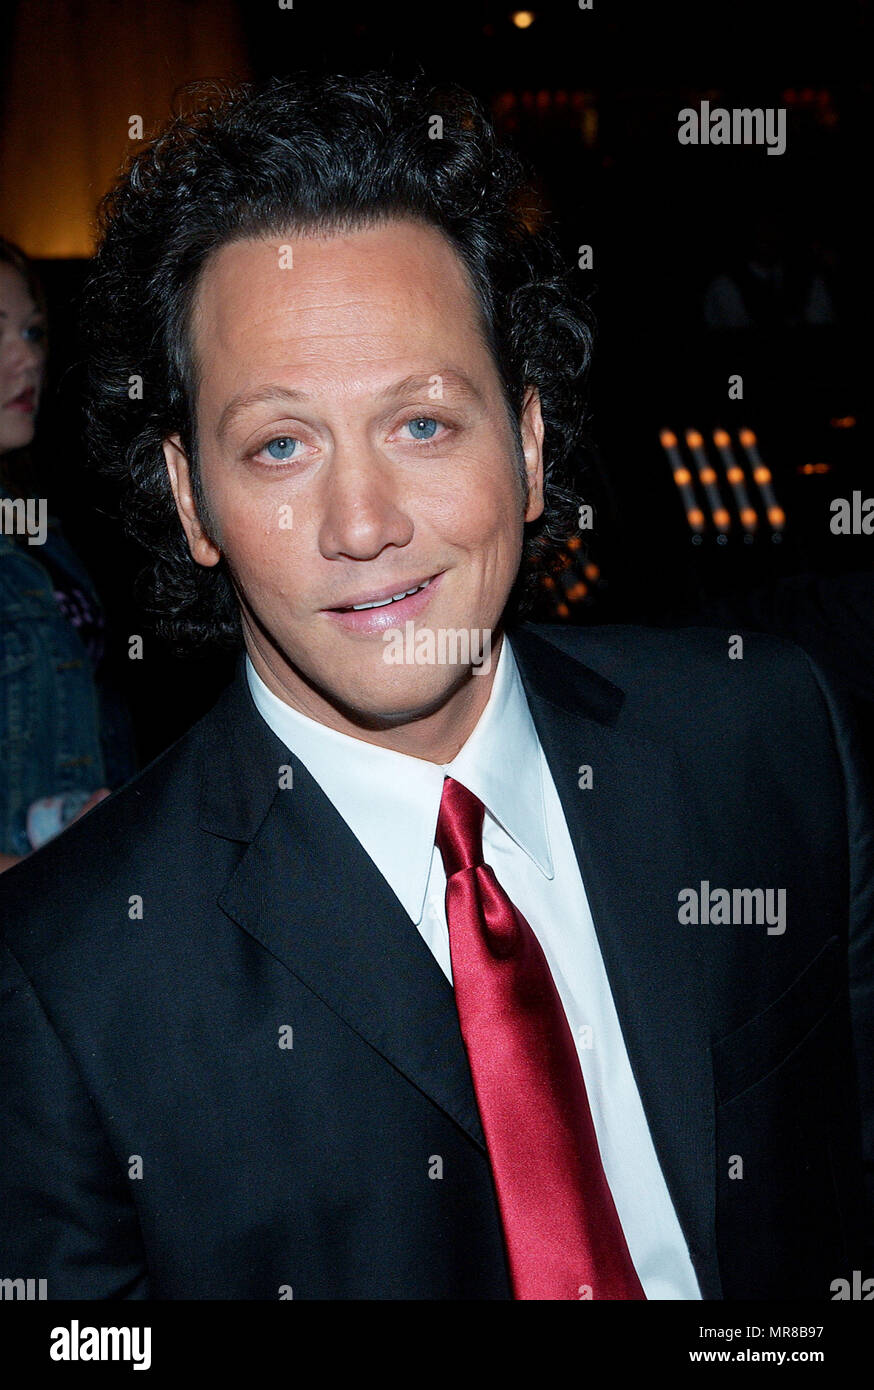 Rob Schneider arriving at the Premiere of Hot Chick at the Century Plaza Theatre in Los Angeles. December 2, 2002.   SchneiderRob wife127 Red Carpet Event, Vertical, USA, Film Industry, Celebrities,  Photography, Bestof, Arts Culture and Entertainment, Topix Celebrities fashion /  Vertical, Best of, Event in Hollywood Life - California,  Red Carpet and backstage, USA, Film Industry, Celebrities,  movie celebrities, TV celebrities, Music celebrities, Photography, Bestof, Arts Culture and Entertainment,  Topix, headshot, vertical, one person,, from the year , 2002, inquiry tsuni@Gamma-USA.com Stock Photo